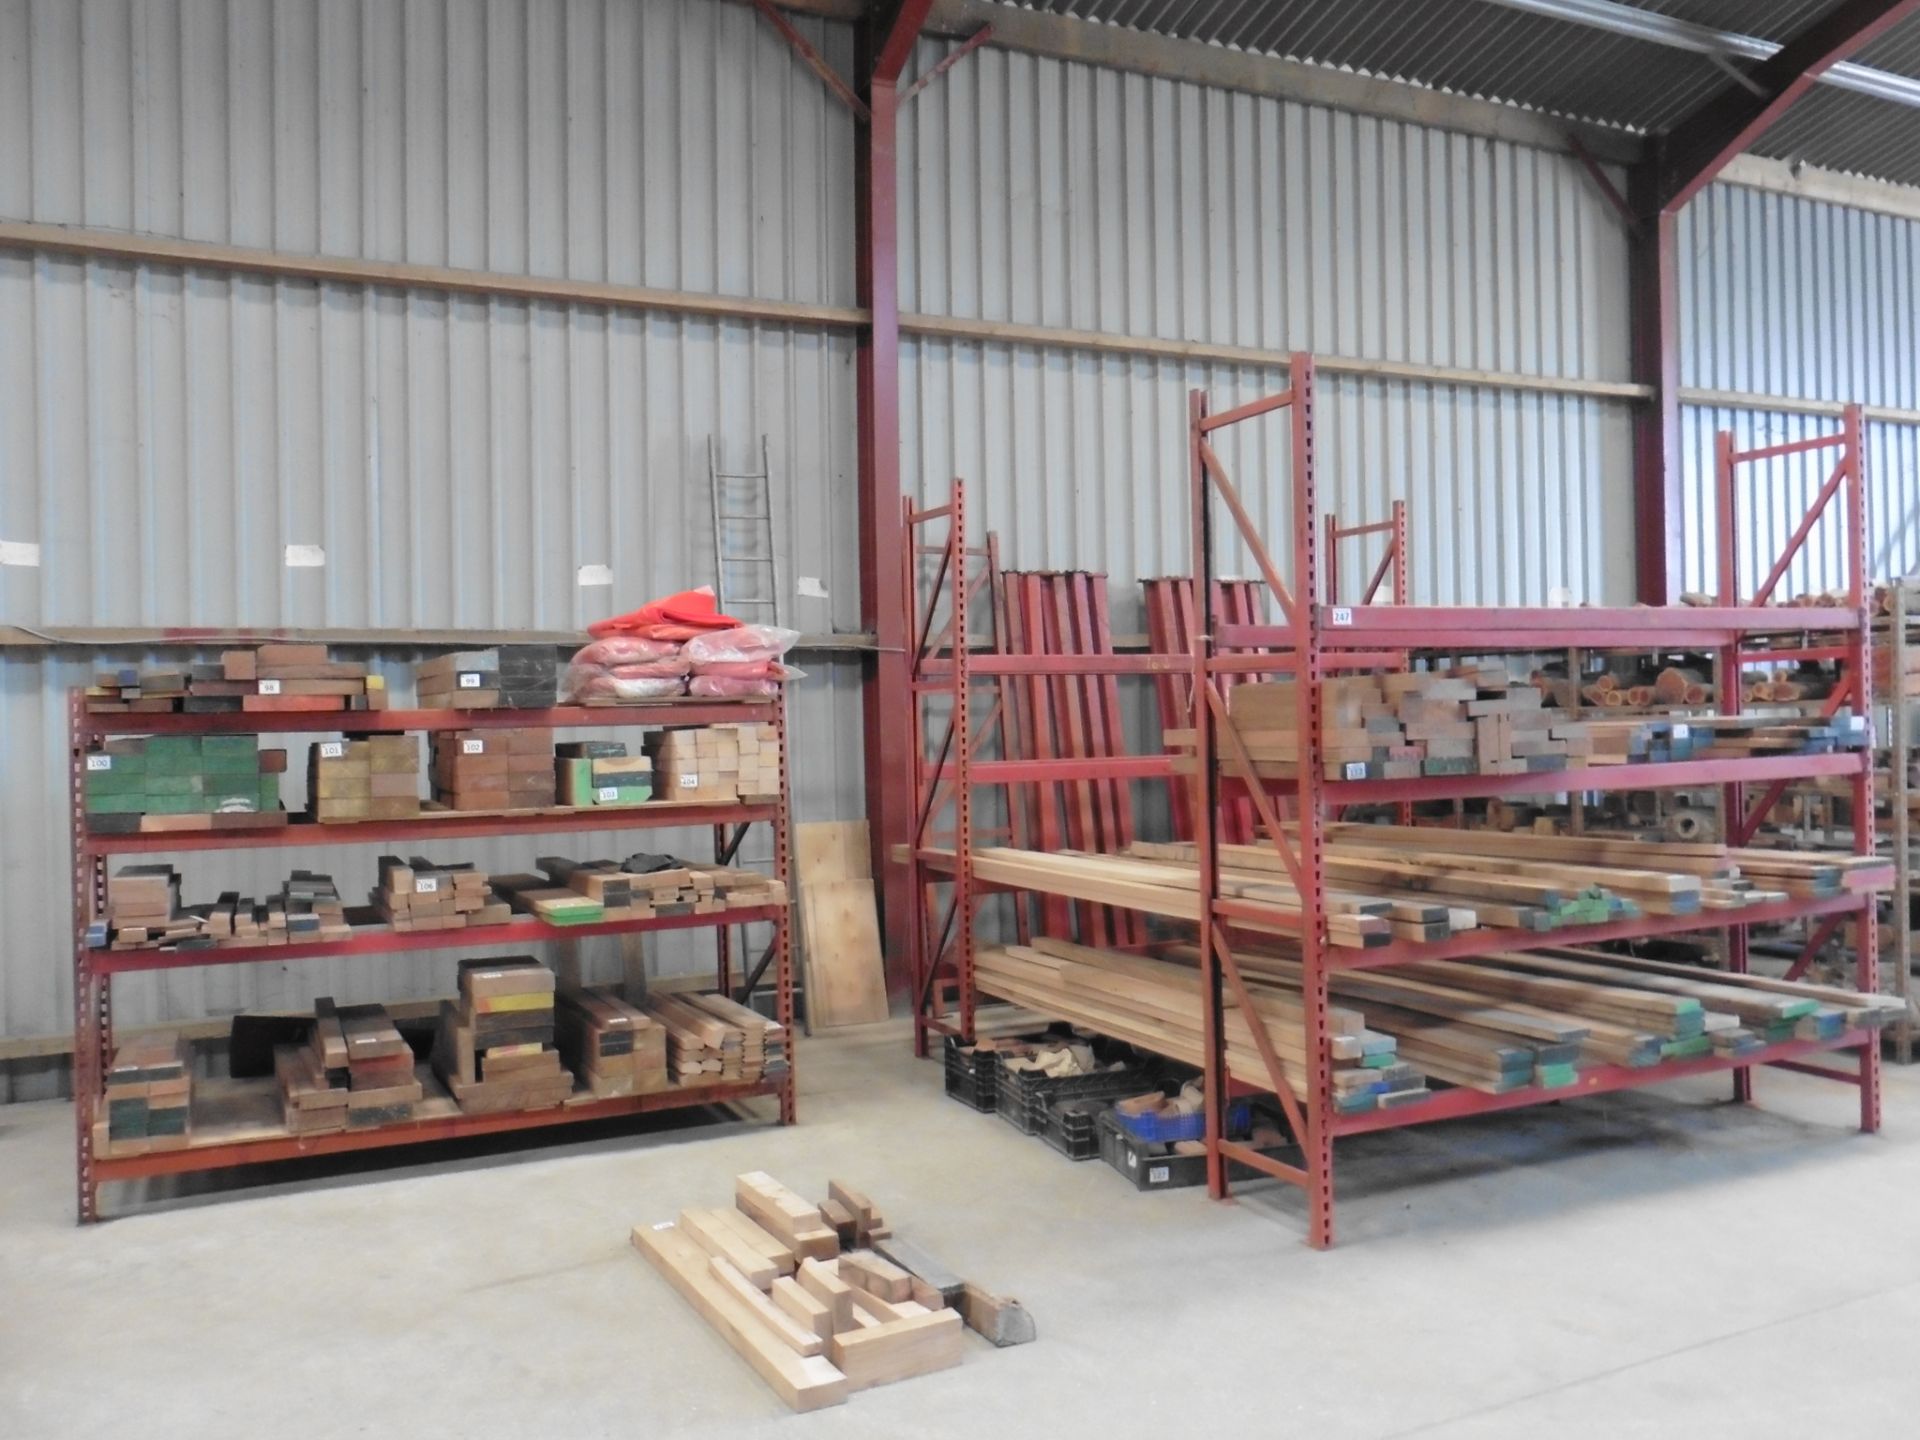 5 running bays of medium duty red steel boltless racking, each bay measures approximately 2550mm